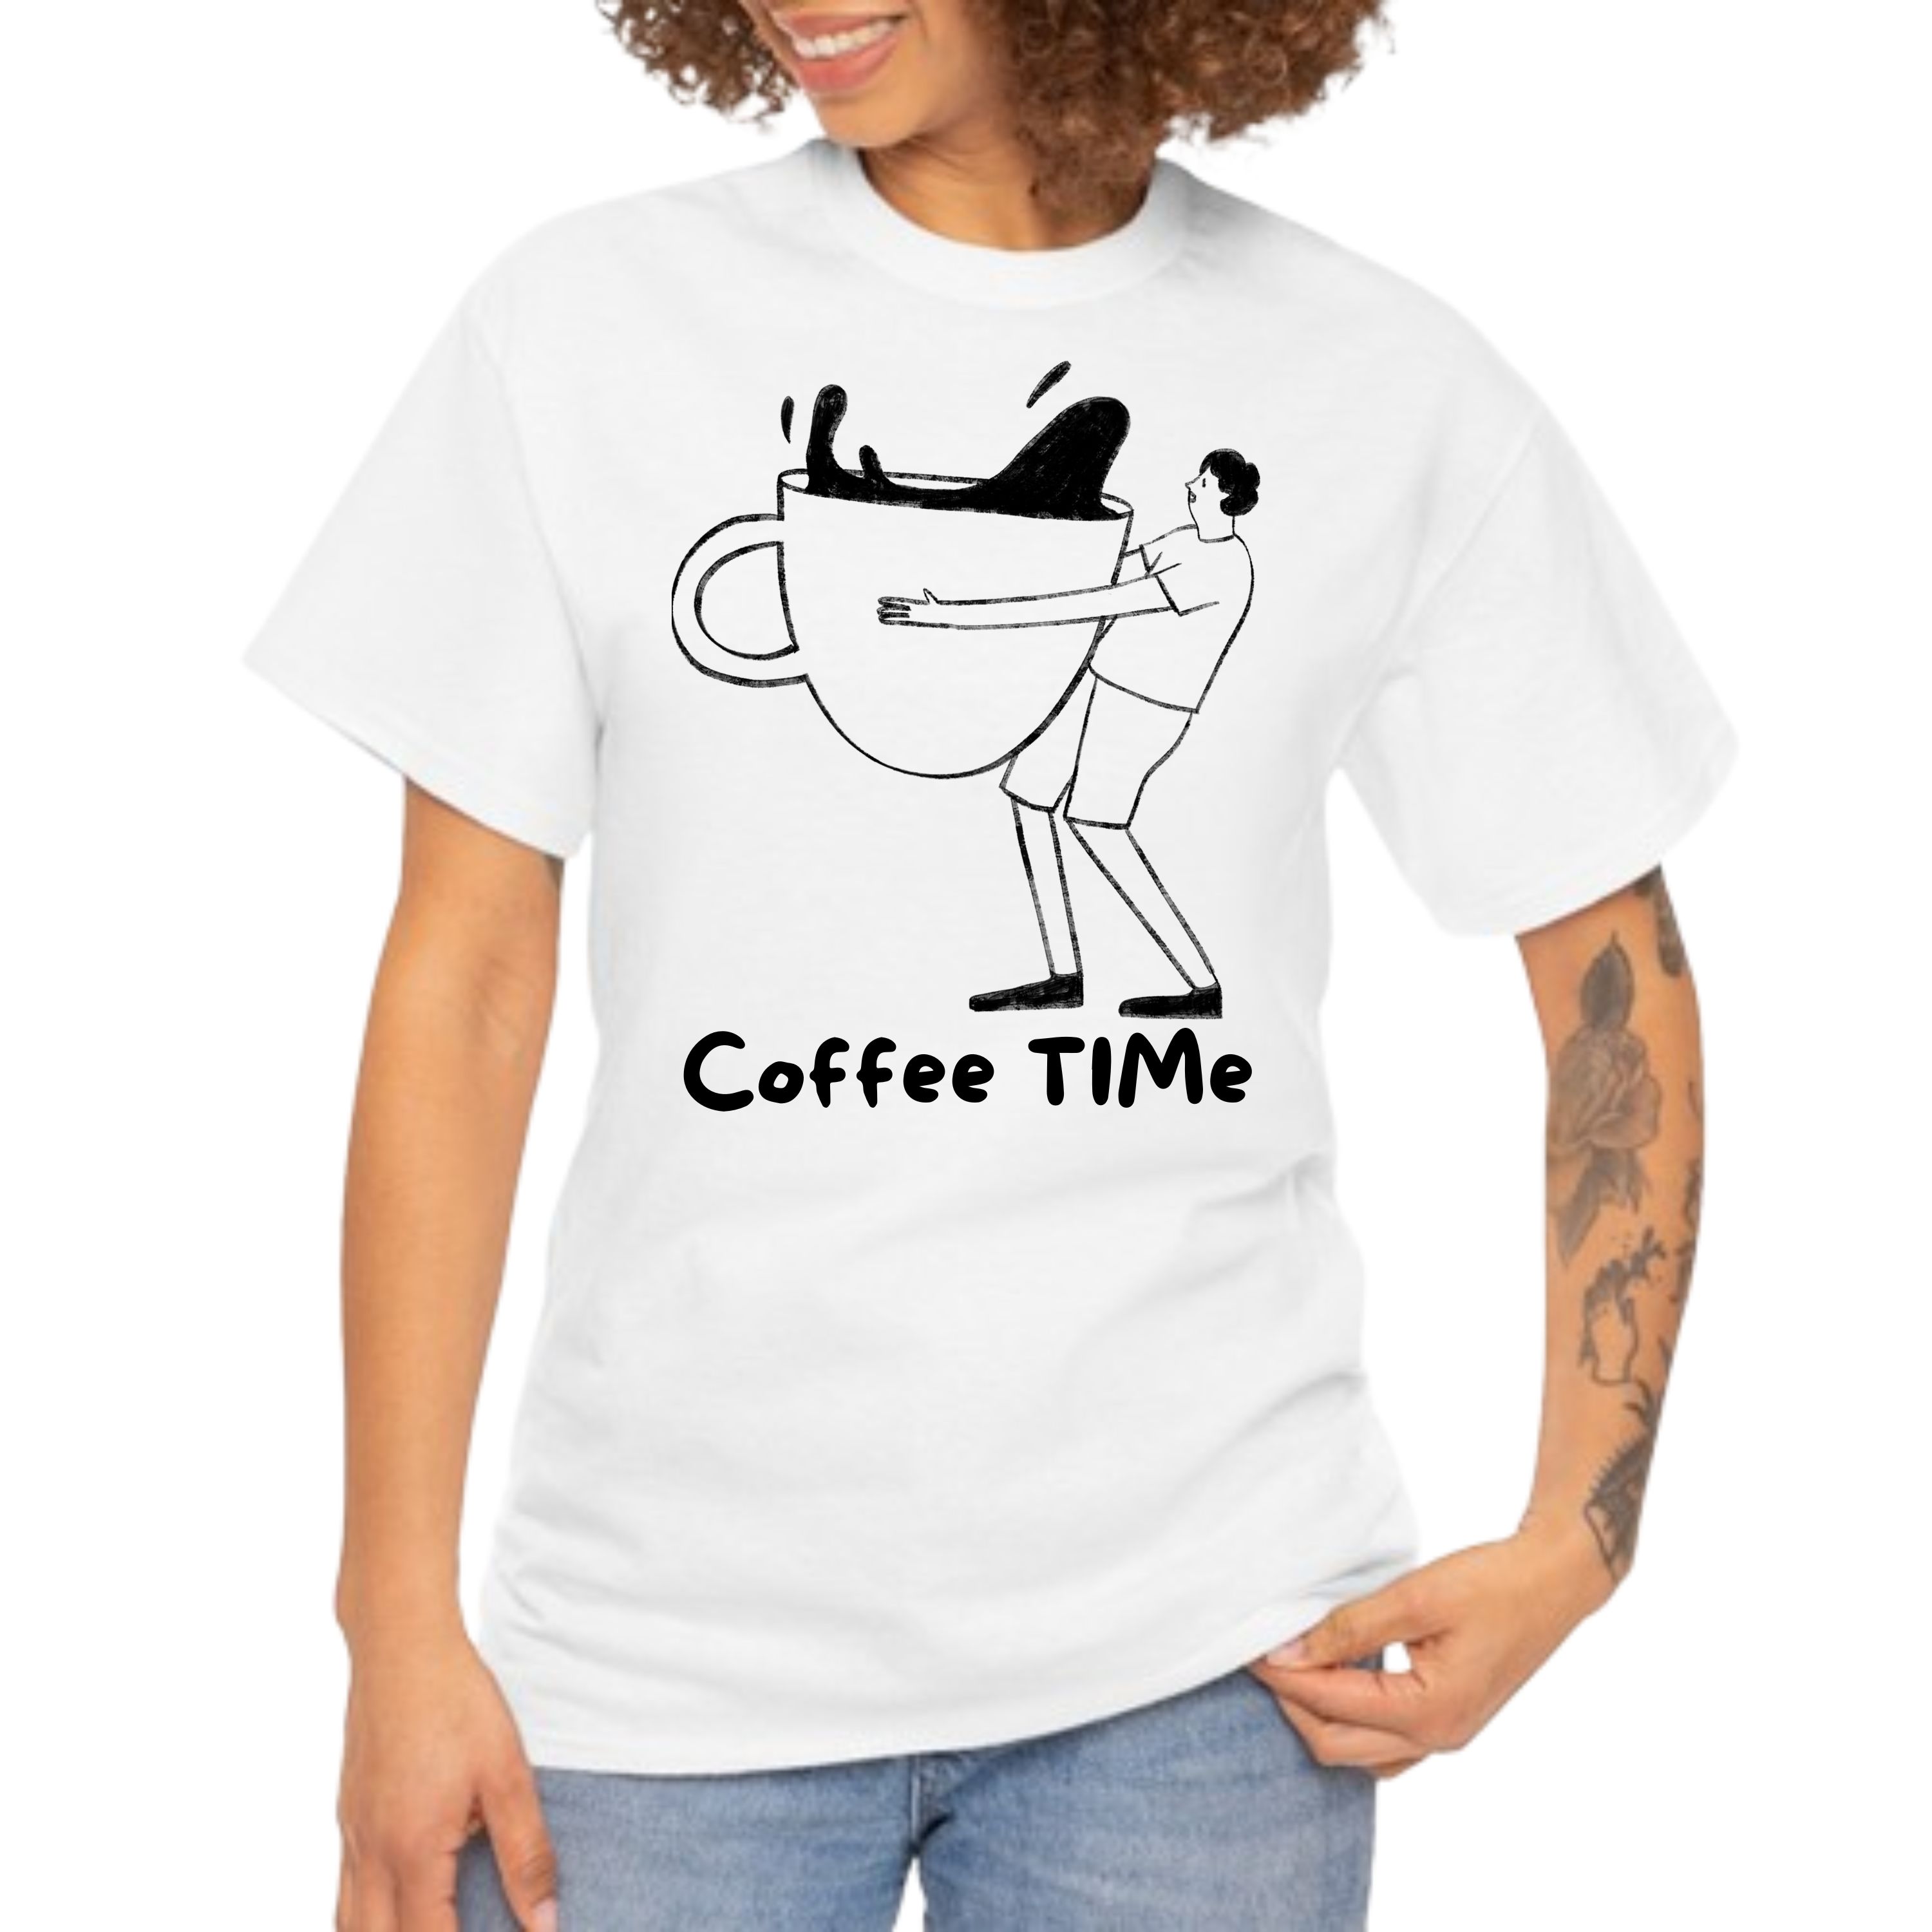 Coffee Time preview image.